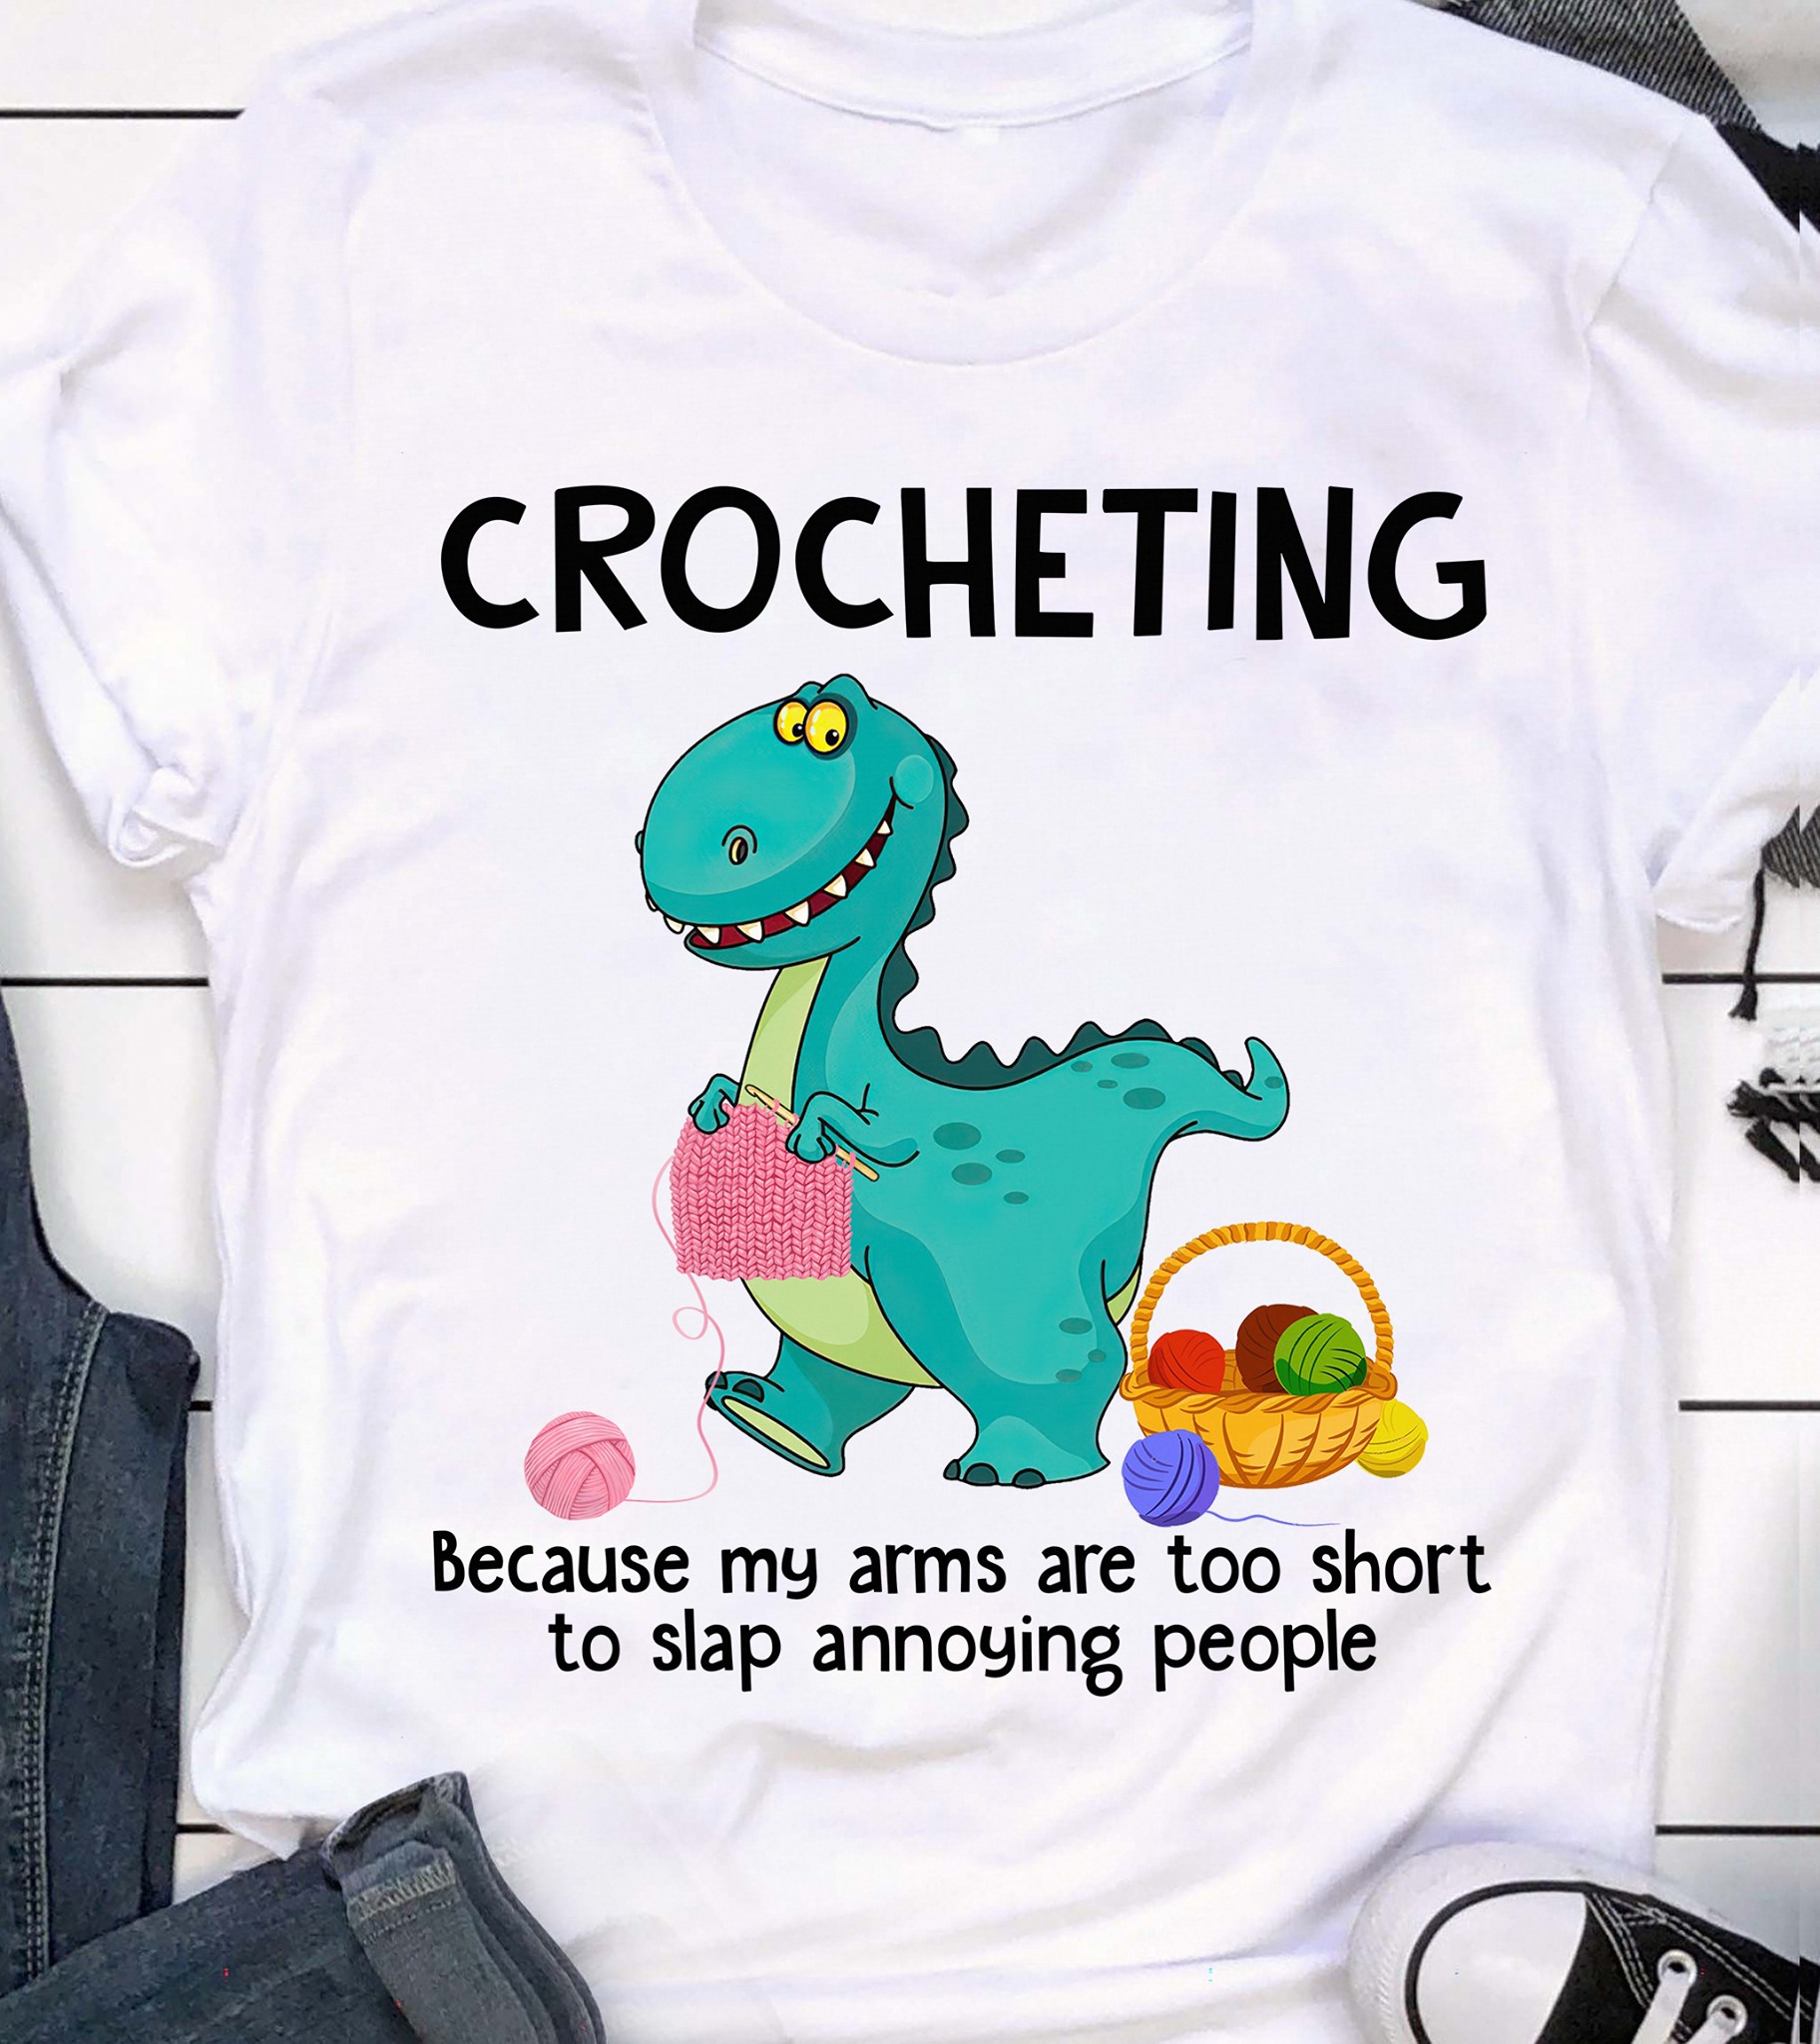 Crocheting because my arms are too short to slap annoying people - Saurus crocheting